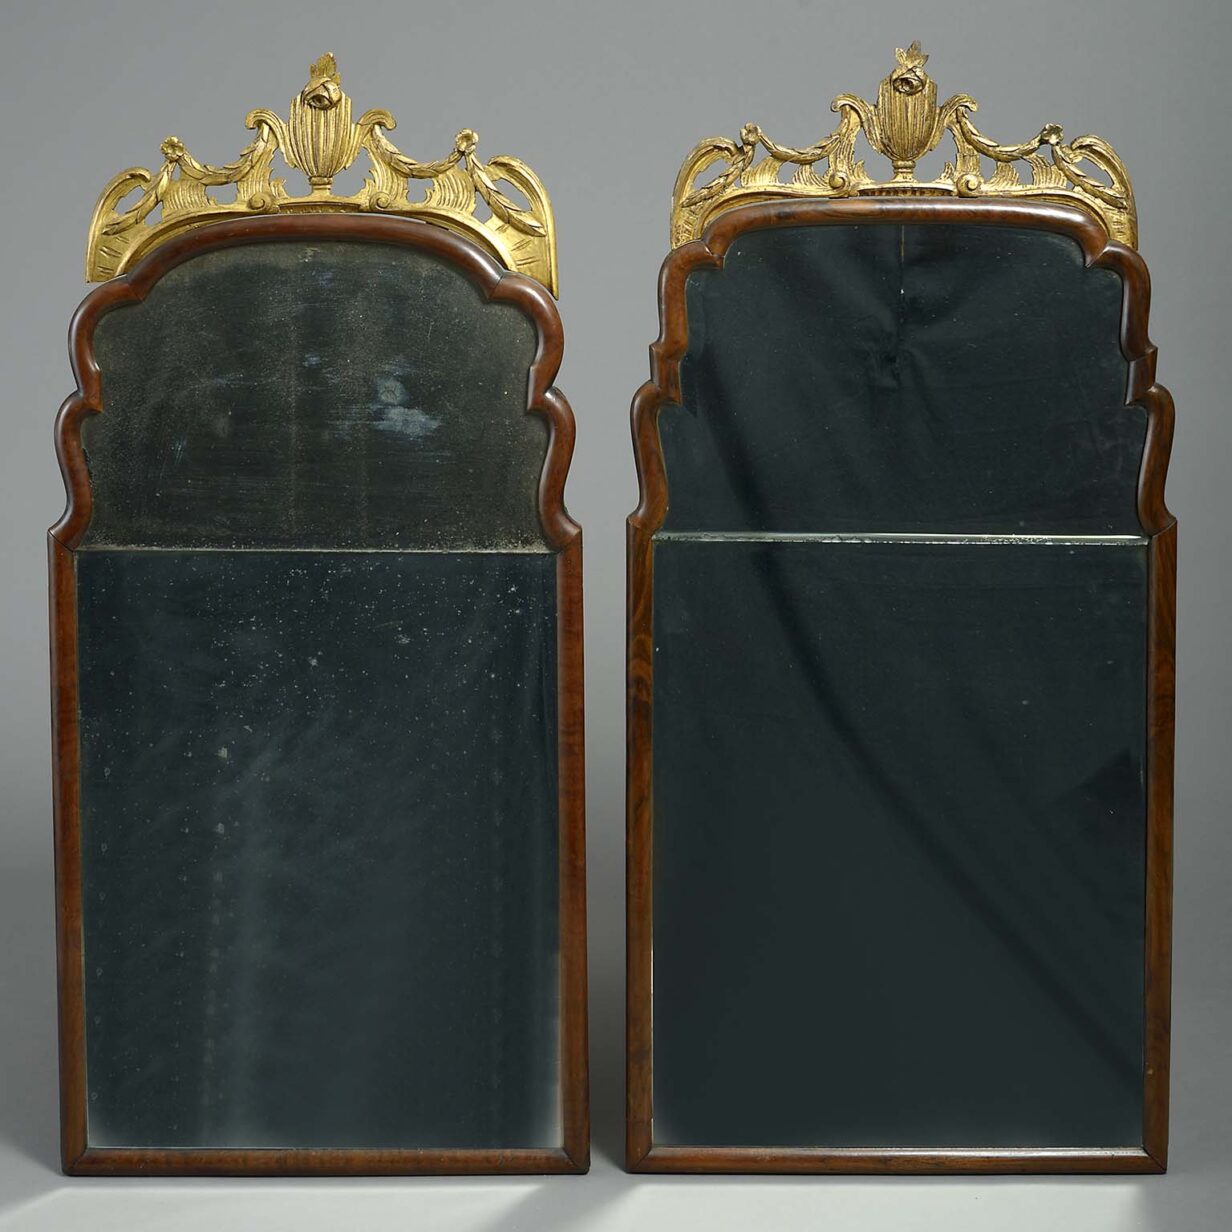 Pair of baltic mirrors